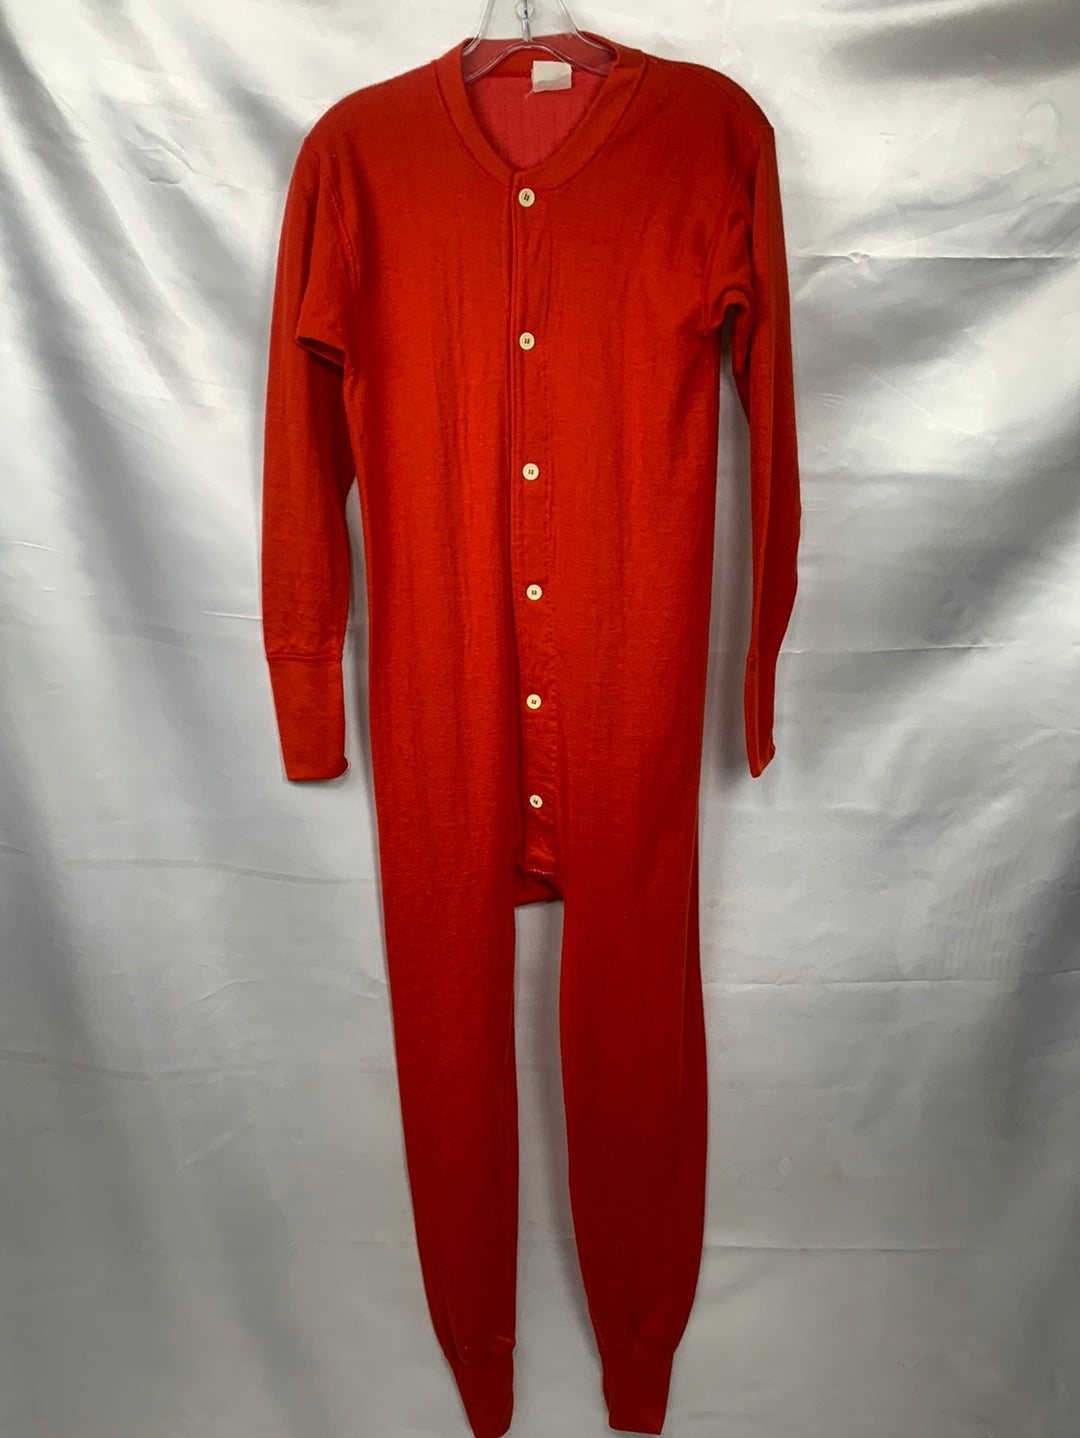 Union Suit Long Johns Thermal Underwear Mens 38 -40 Red – The